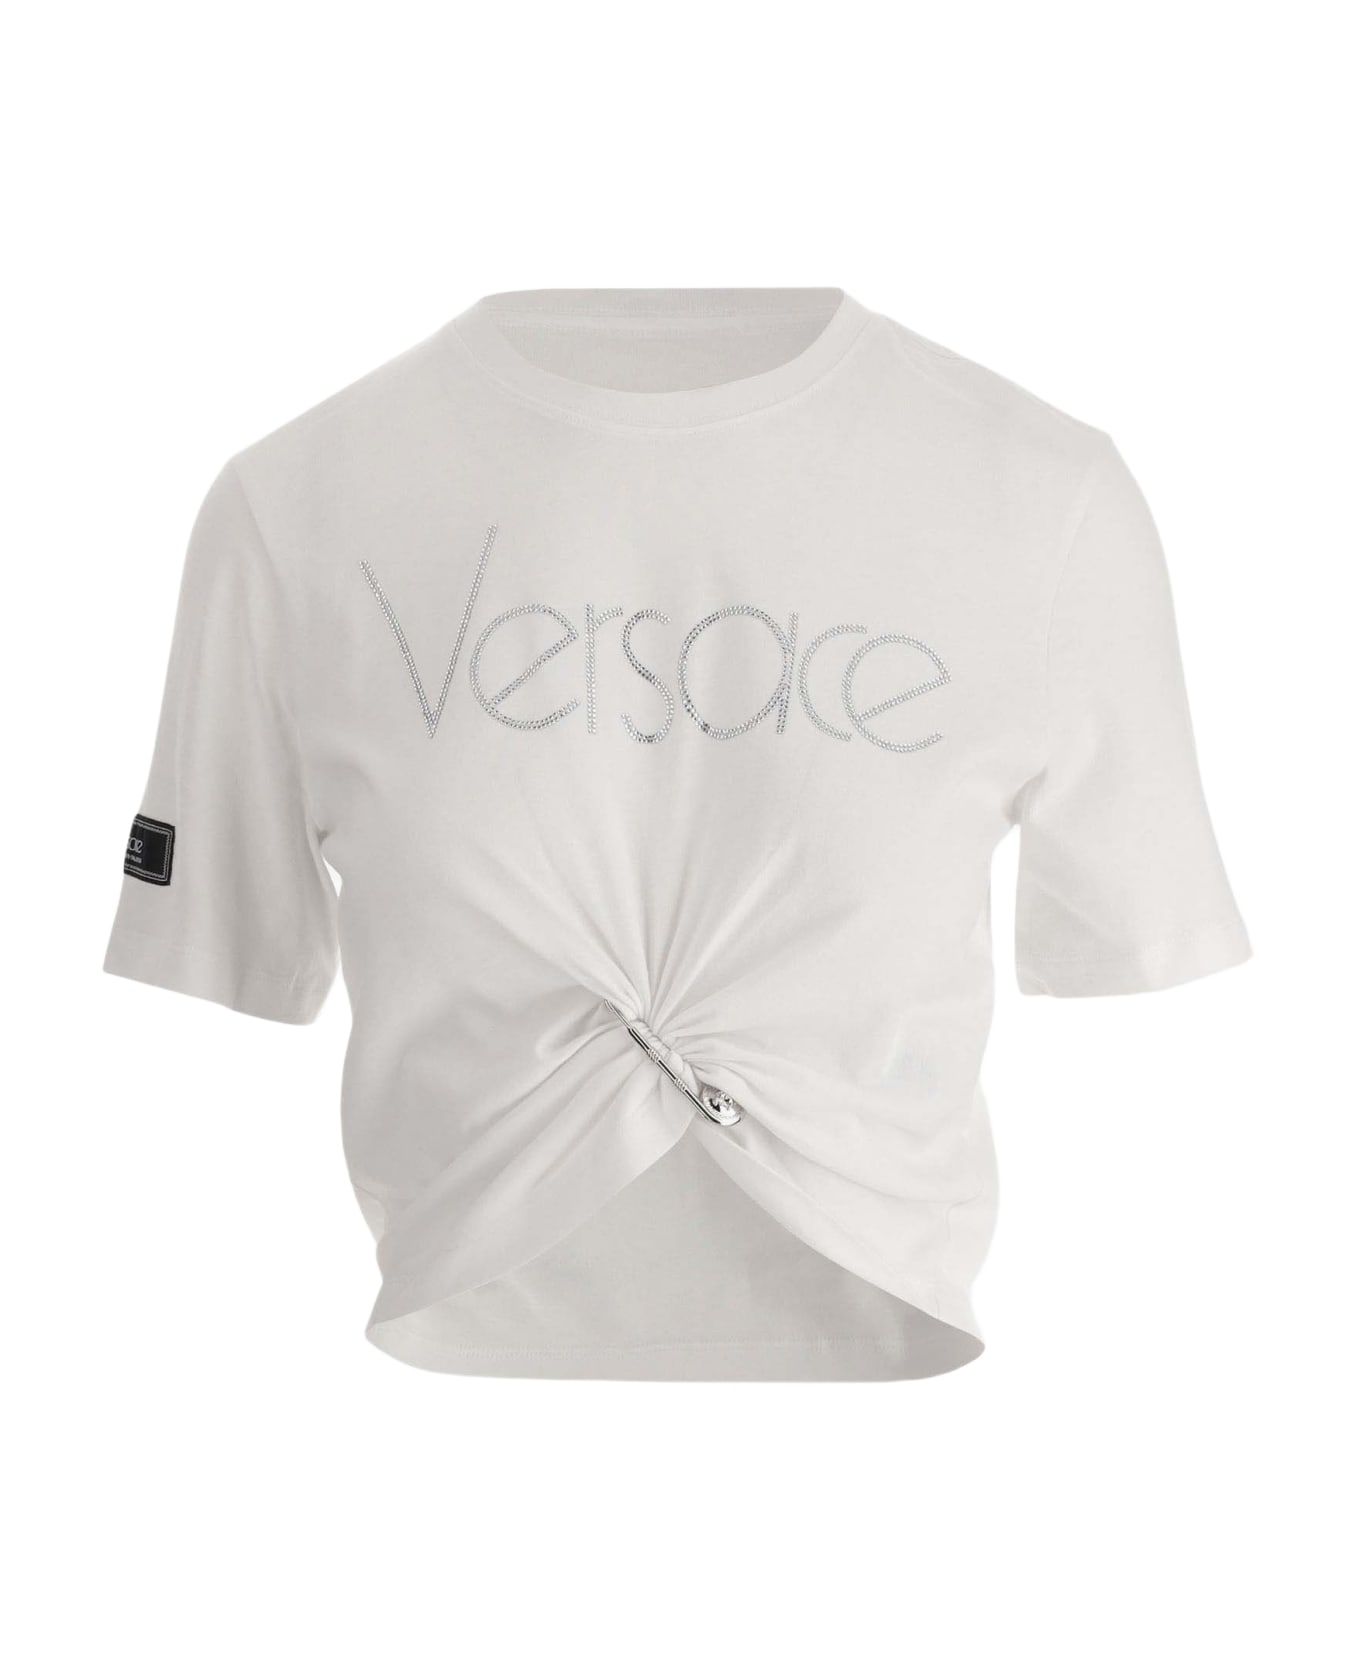 Versace 1978 Re-edition T-shirt With Logo - White